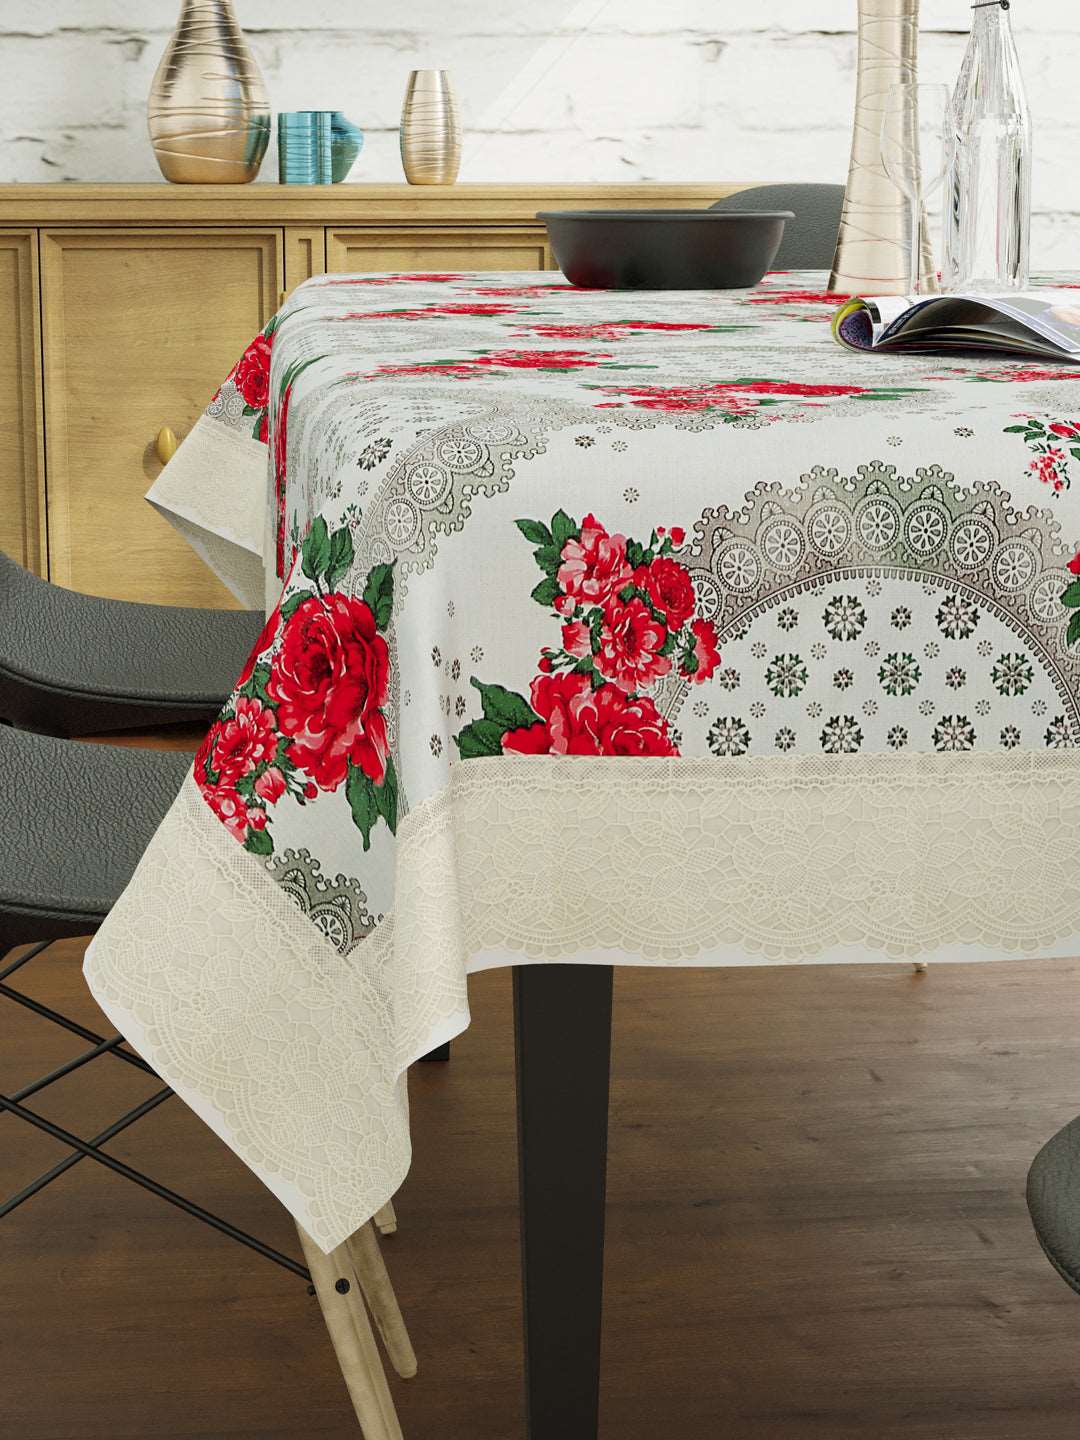 6 Seater Dining Table Cover; Material - PVC; Anti Slip; Red & White